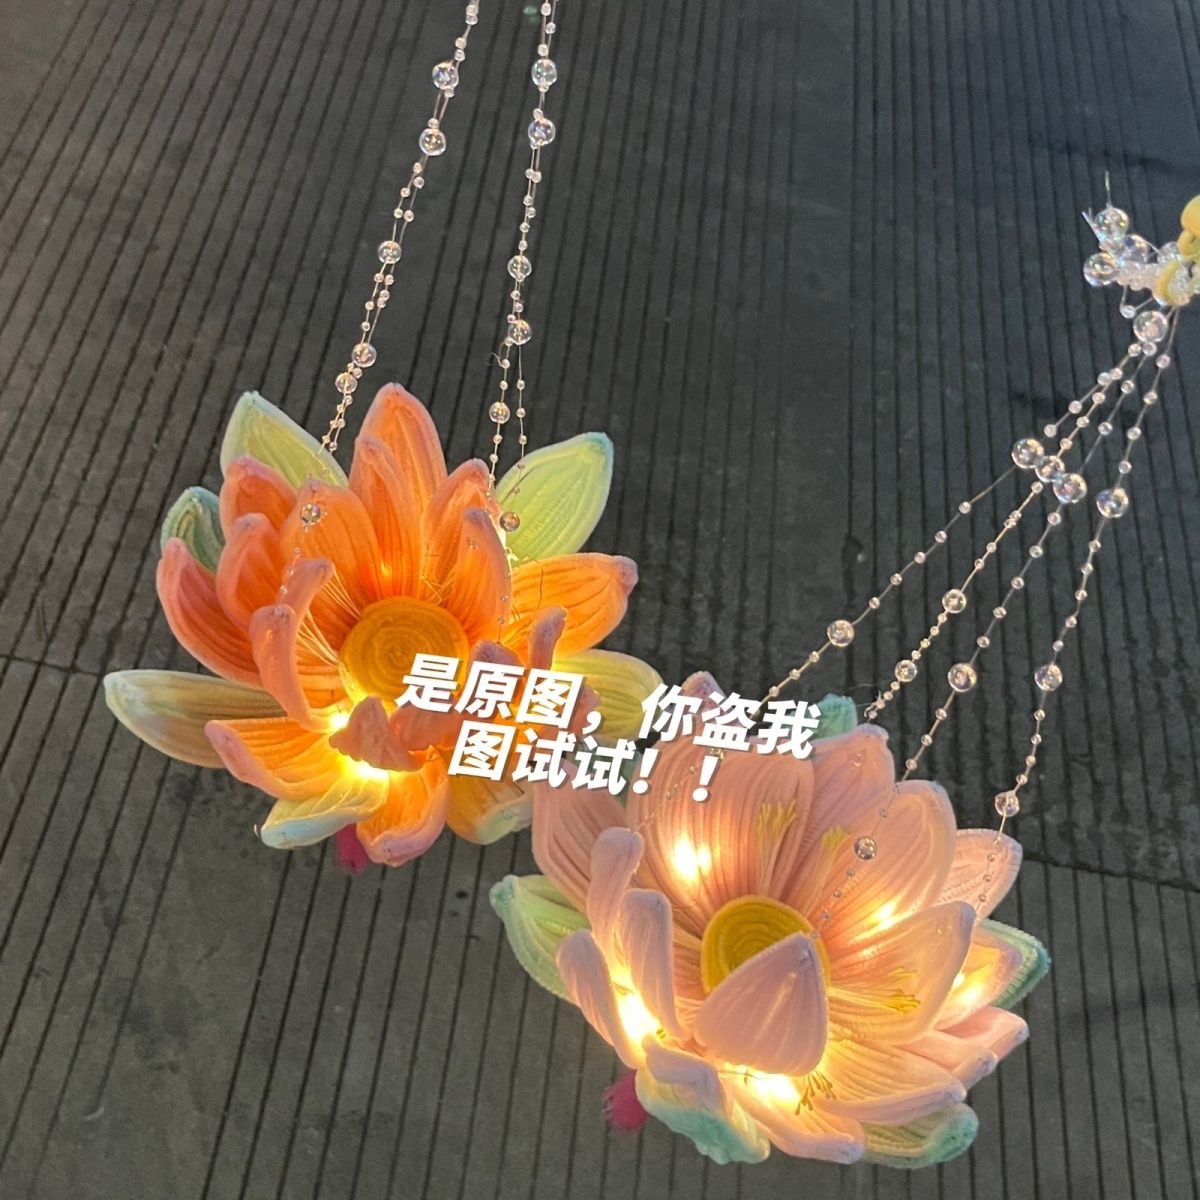 Tiktok Lotus Lamp Twisted Stick Chinese Portable Diy Material Package Mid-Autumn Festival Festive Lantern Girlfriends' Gift Friend Gift